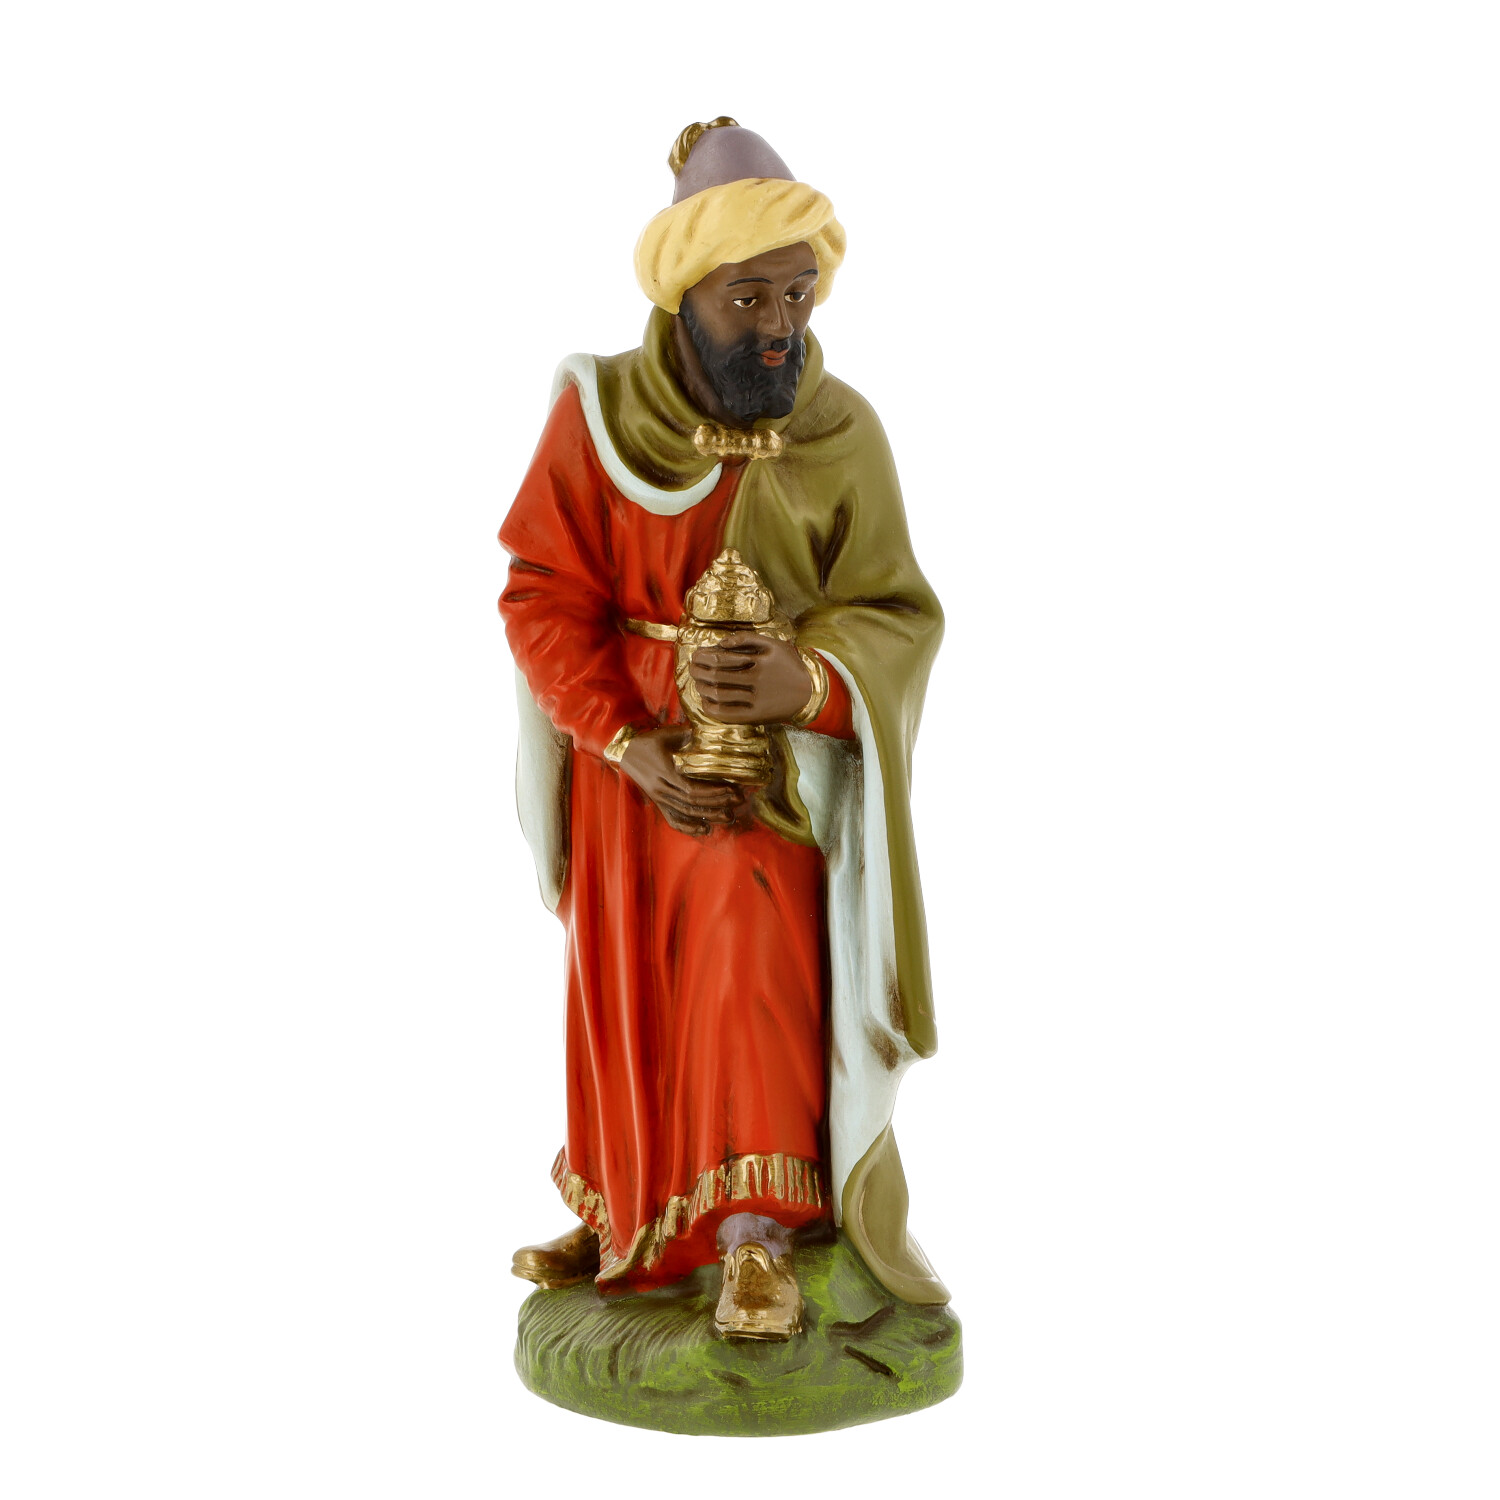 Caspar, to 6.75 in. figures - Marolin Papermaché - made in Germany